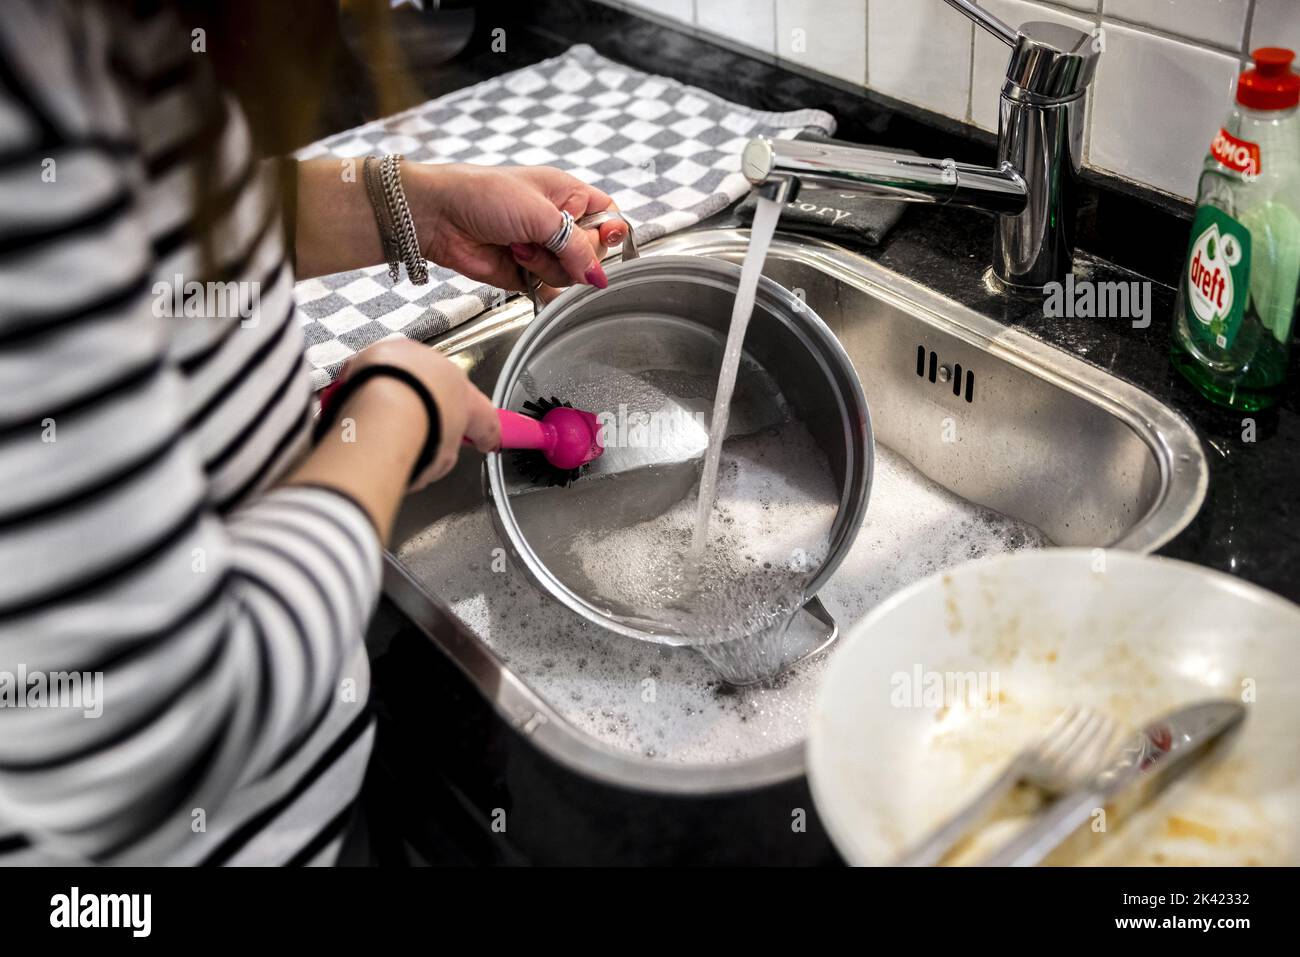 2022-09-29 13:58:44 ILLUSTRATIVE - A woman is washing dishes by hand to save energy. Gas supplies from Russia are declining as a result of the war with Ukraine. ANP ROB ENGELAAR netherlands out - belgium out Stock Photo